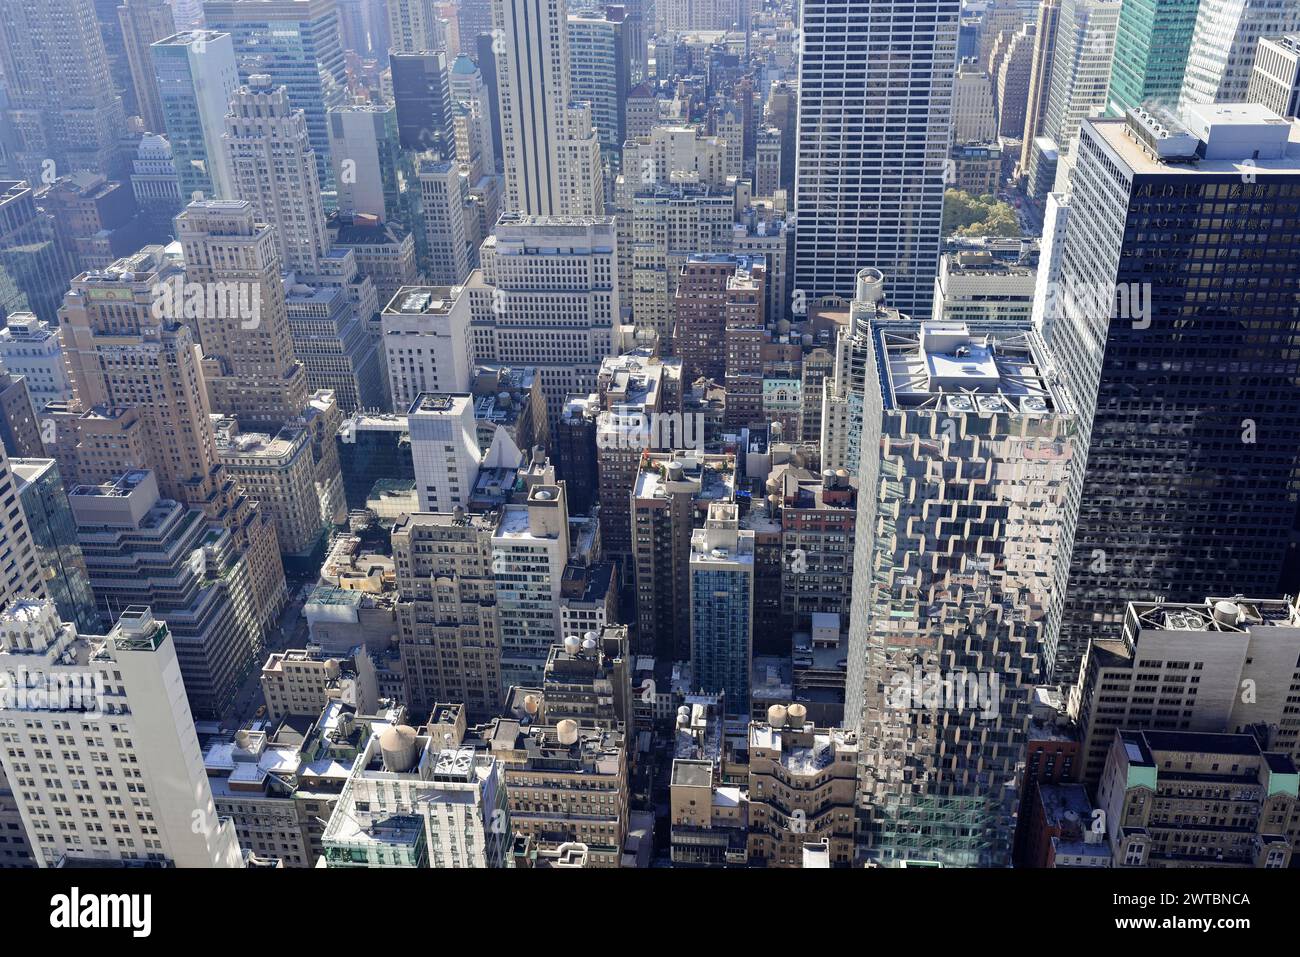 Viewing terrace of Rockefeller Center, aerial view of densely built-up streets and a multitude of buildings, Manhattan, New York City, New York, USA Stock Photo